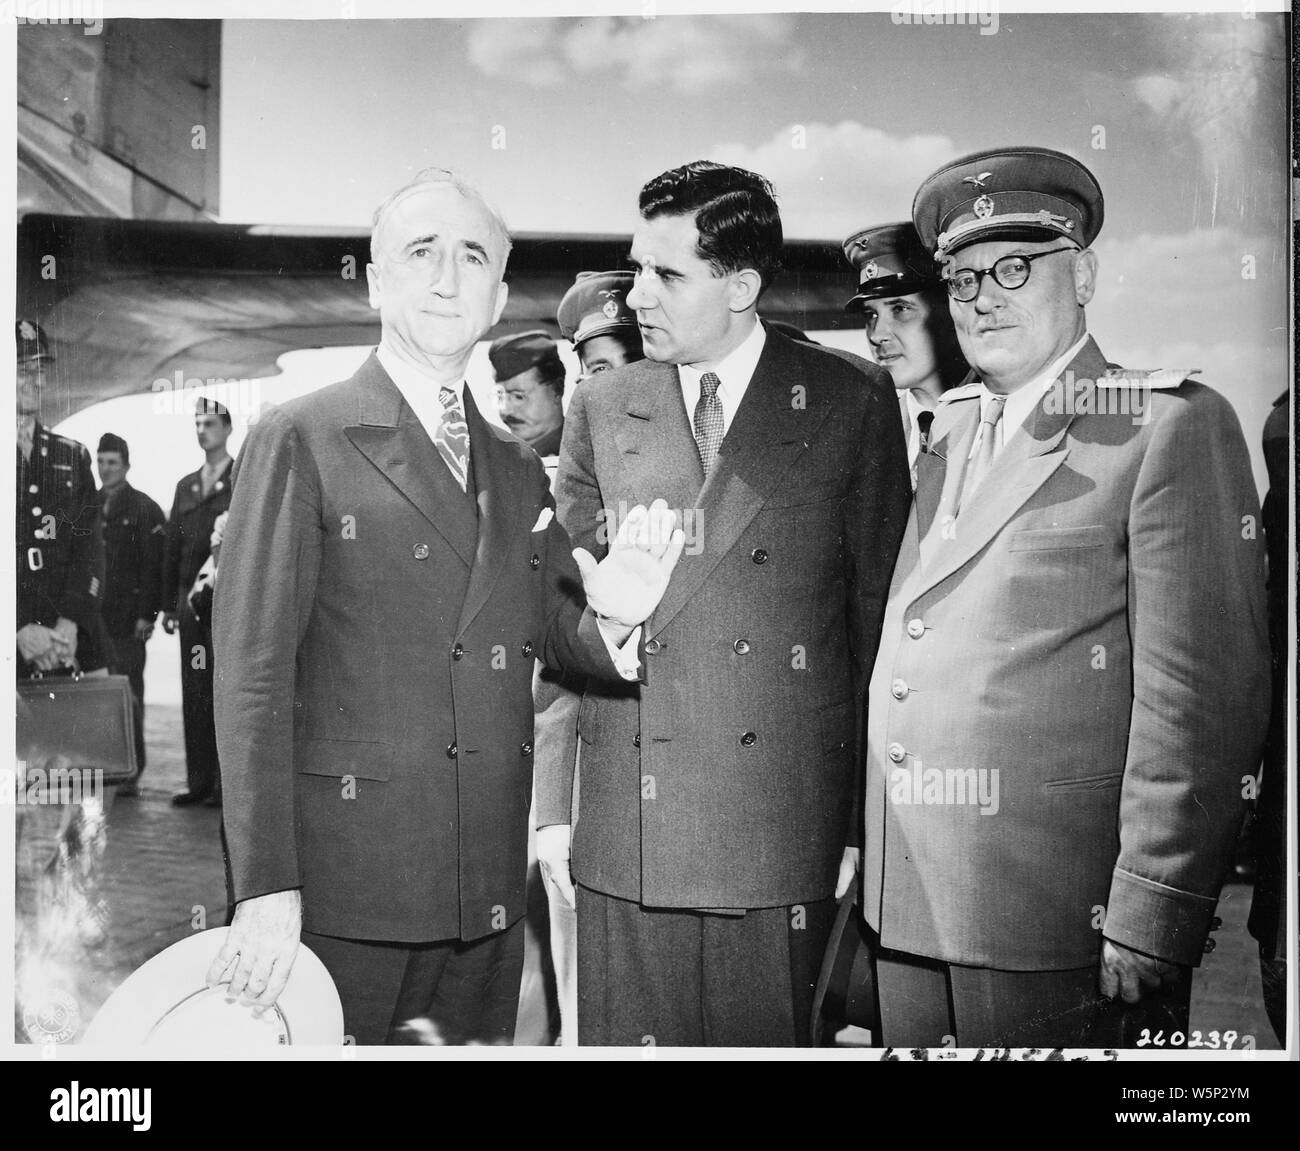 James Byrnes with Gromyko and Vishinsky; Scope and content:  Secretary of State James Byrnes (left) is greeted at the airport en route to the Potsdam Conference by Soviet Ambassador to the United States Andrei Gromyko (center) and Soviet Foreign Affairs Minister Andre Vishinsky(right). Stock Photo